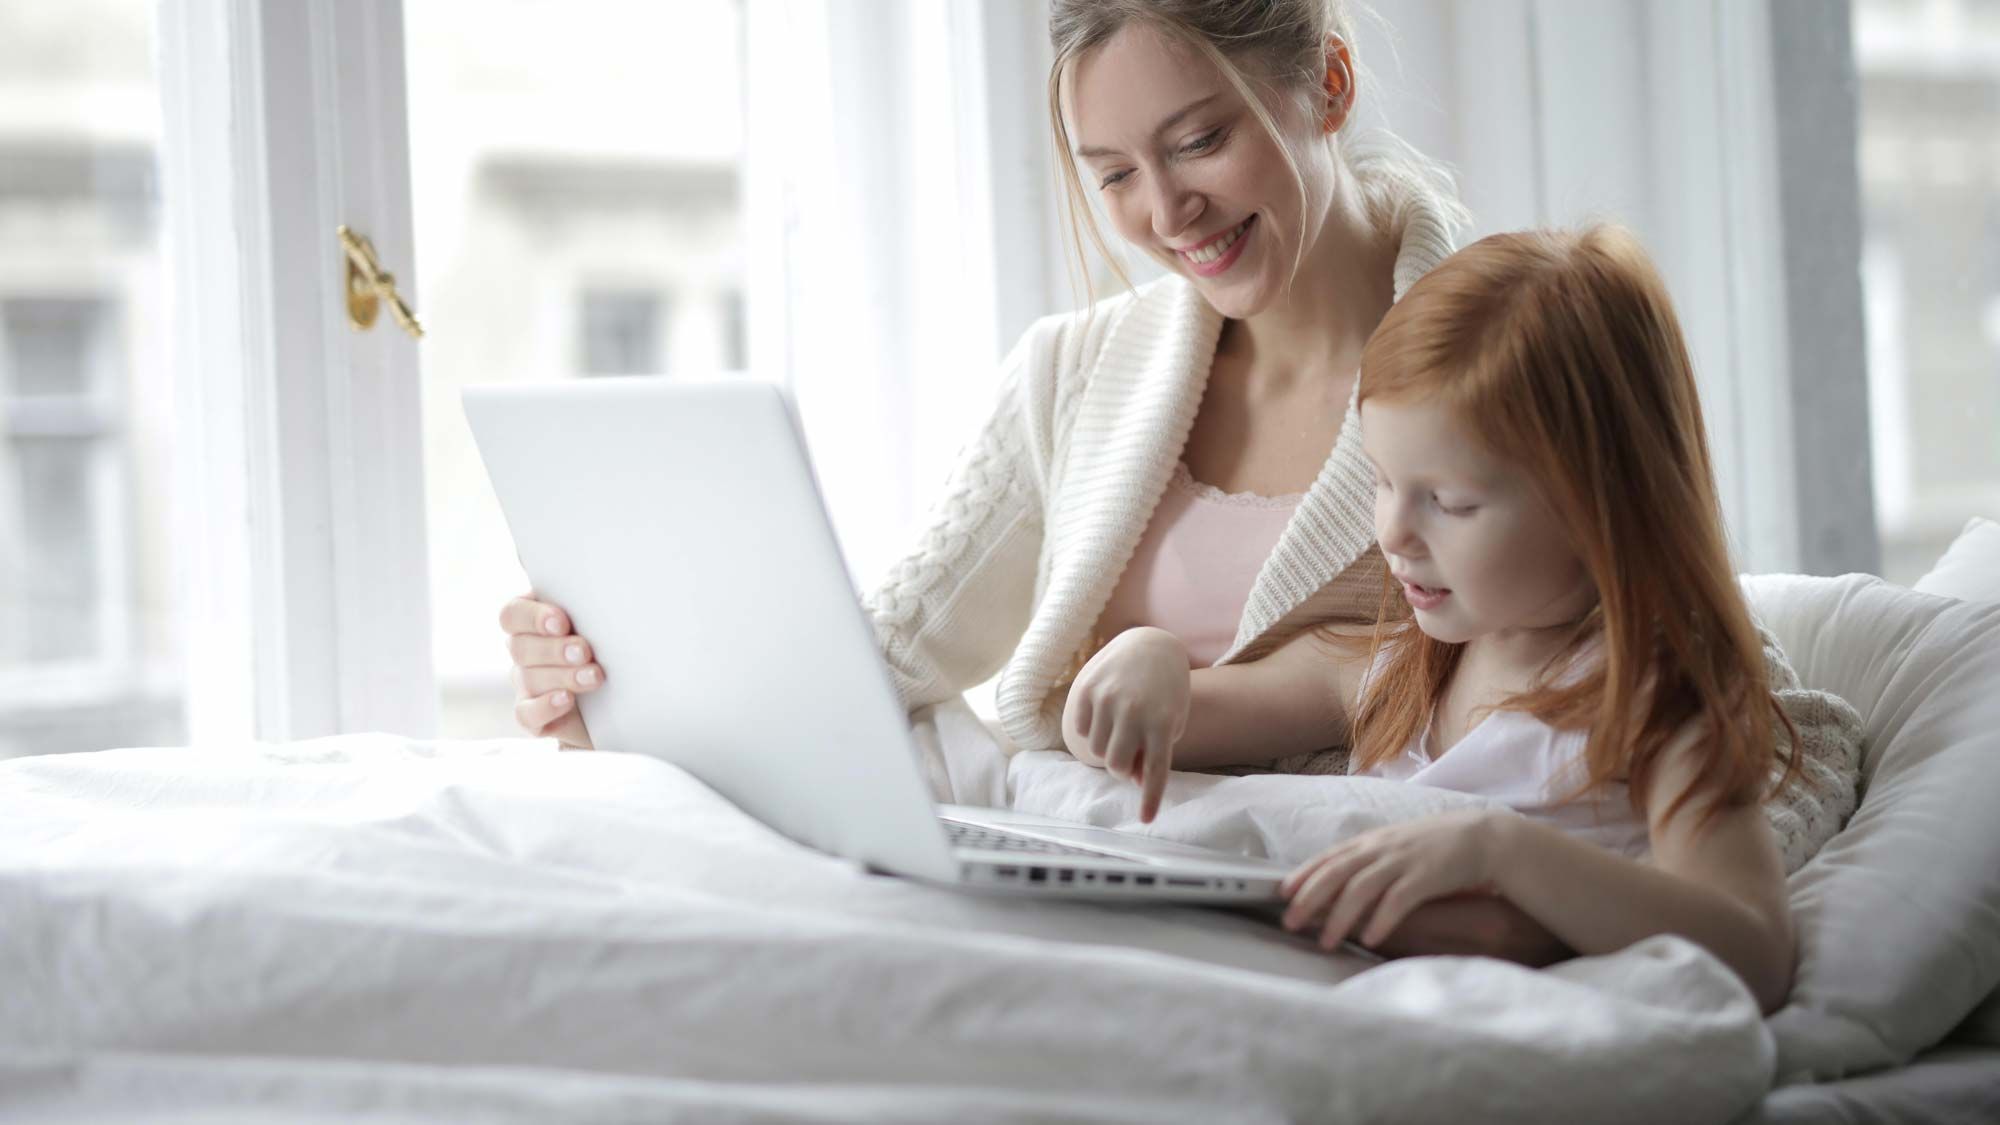 mom and daughter playing on laptop together